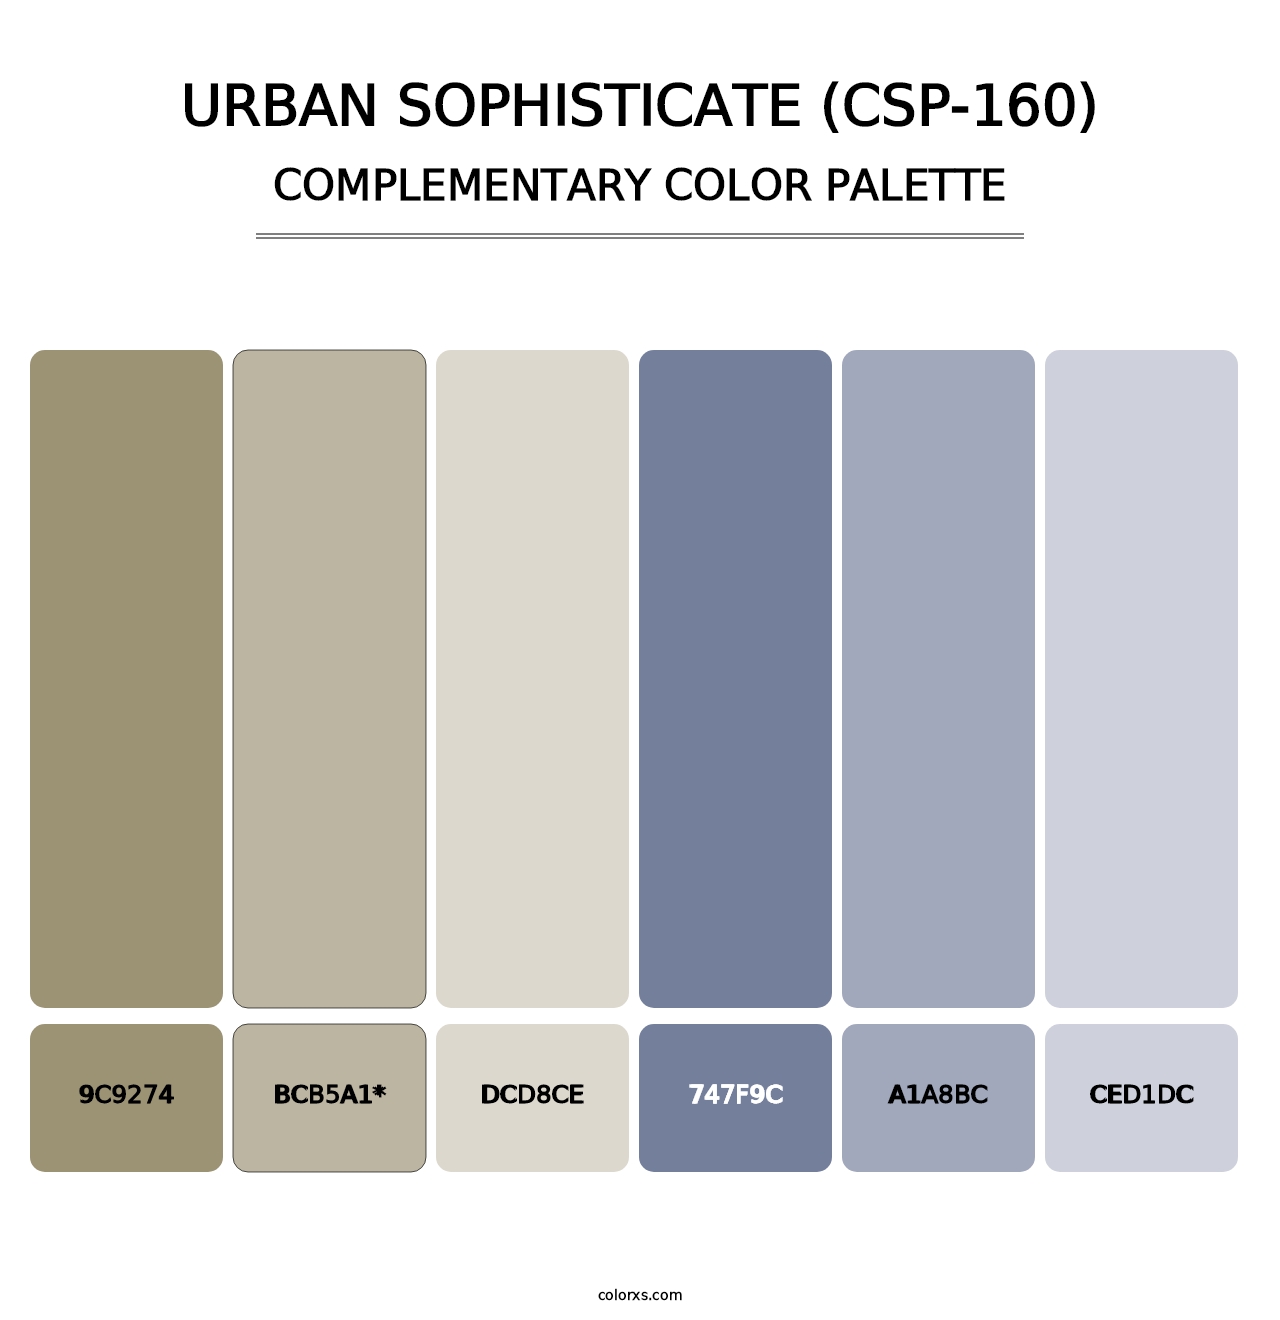 Urban Sophisticate (CSP-160) - Complementary Color Palette